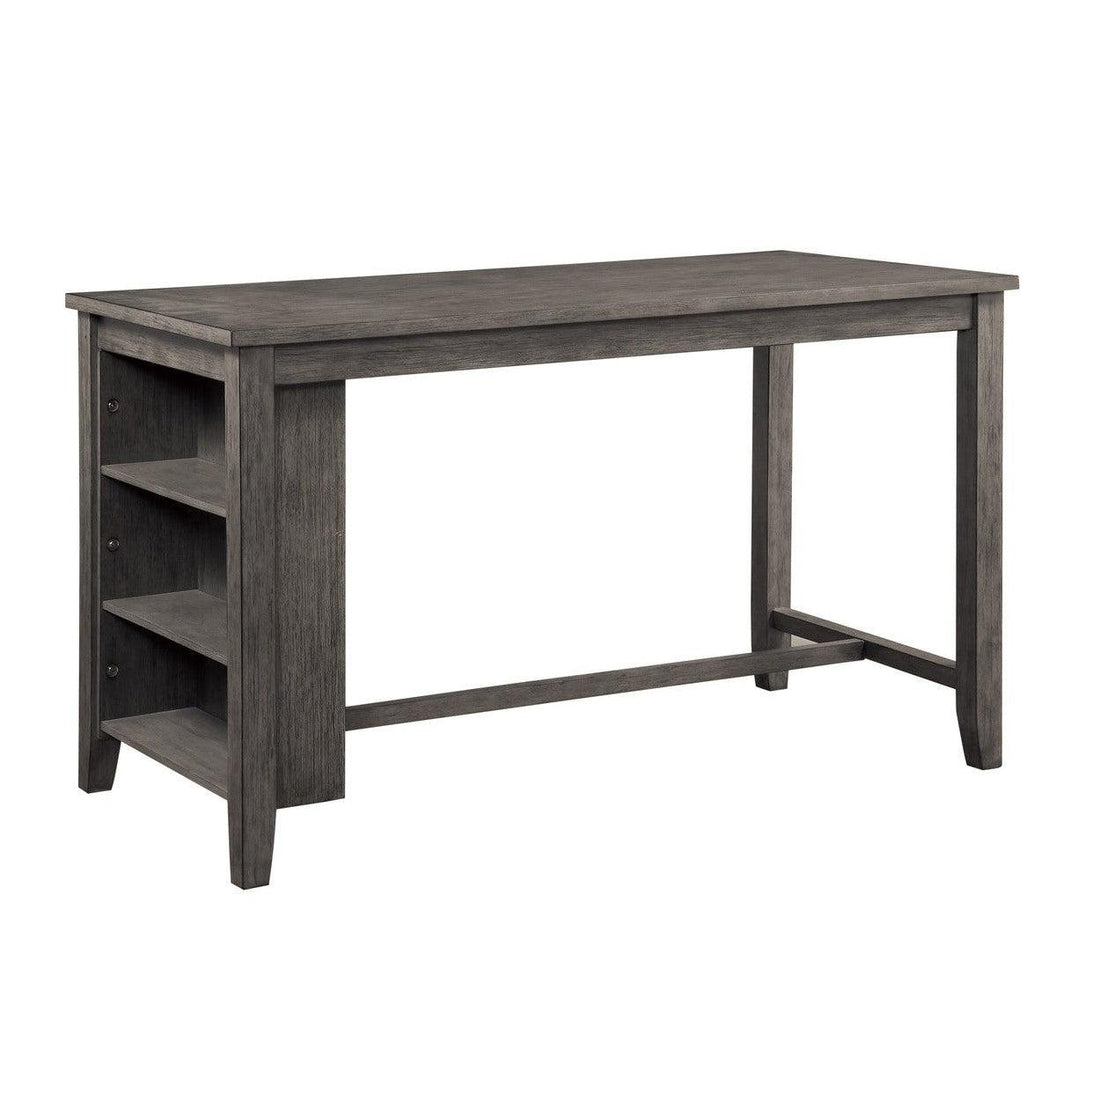 COUNTER HEIGHT TABLE, GRAY 5603-36